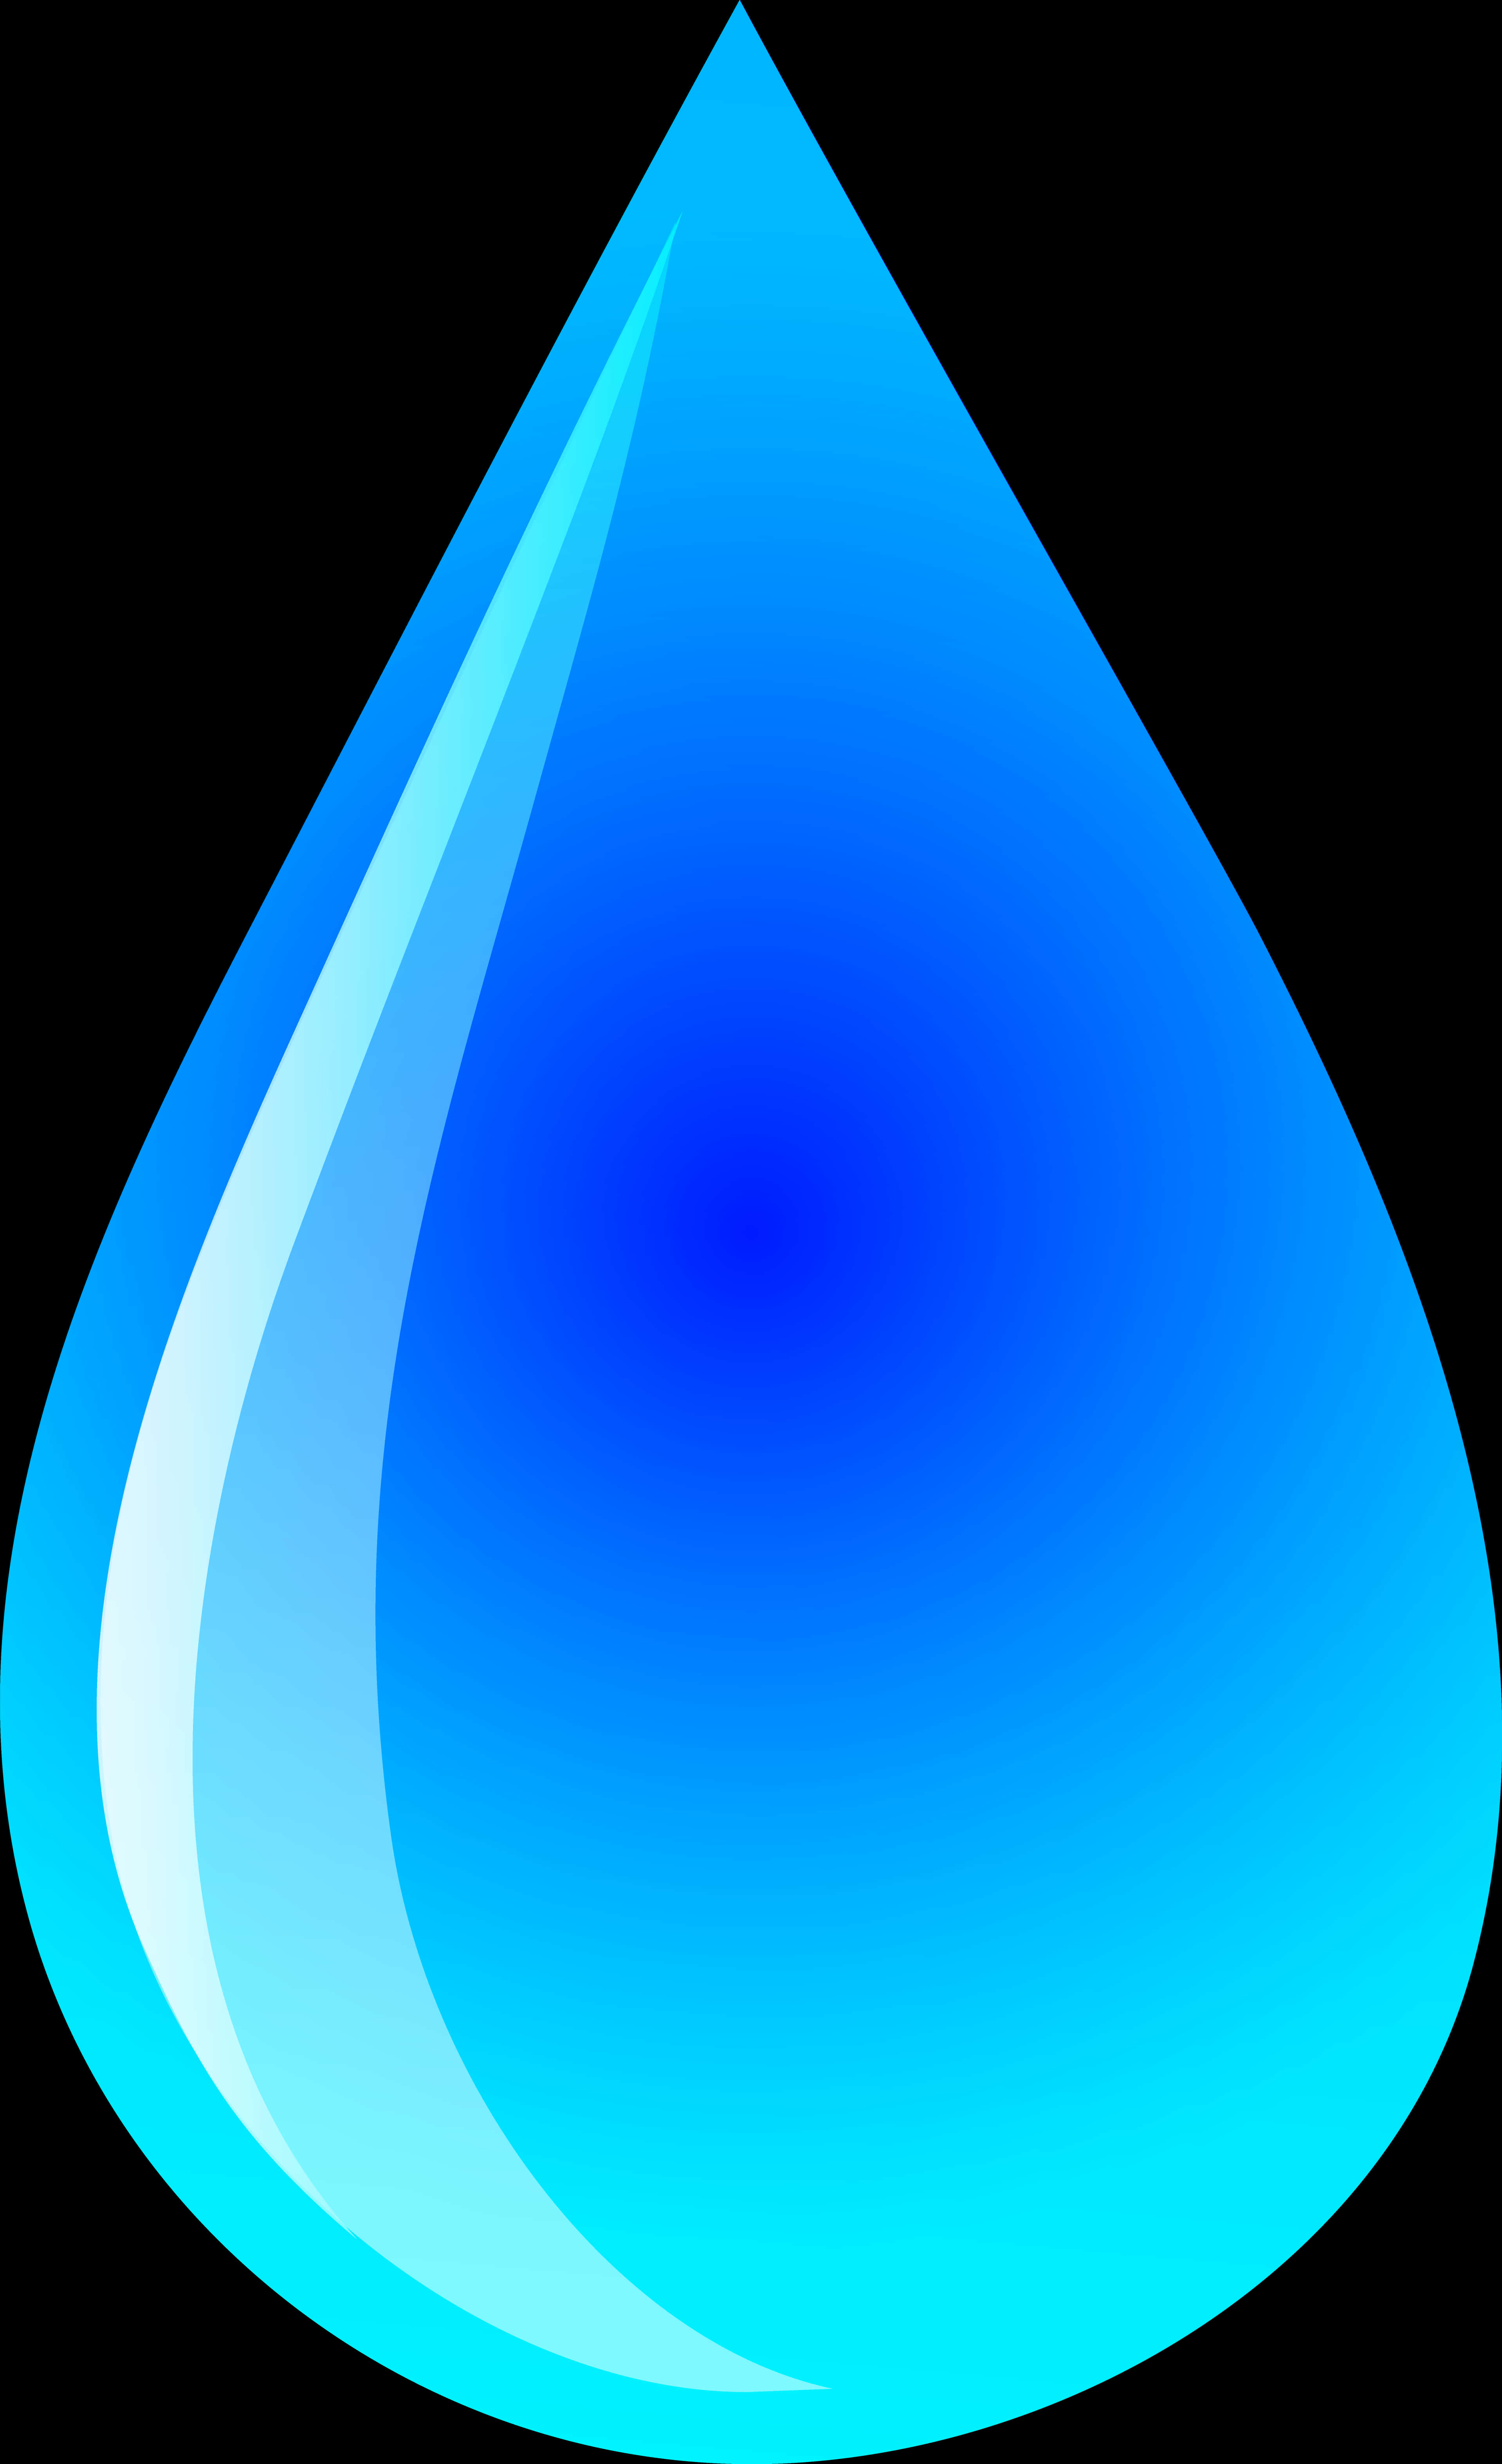 Abstract Blue Water Drop PNG image